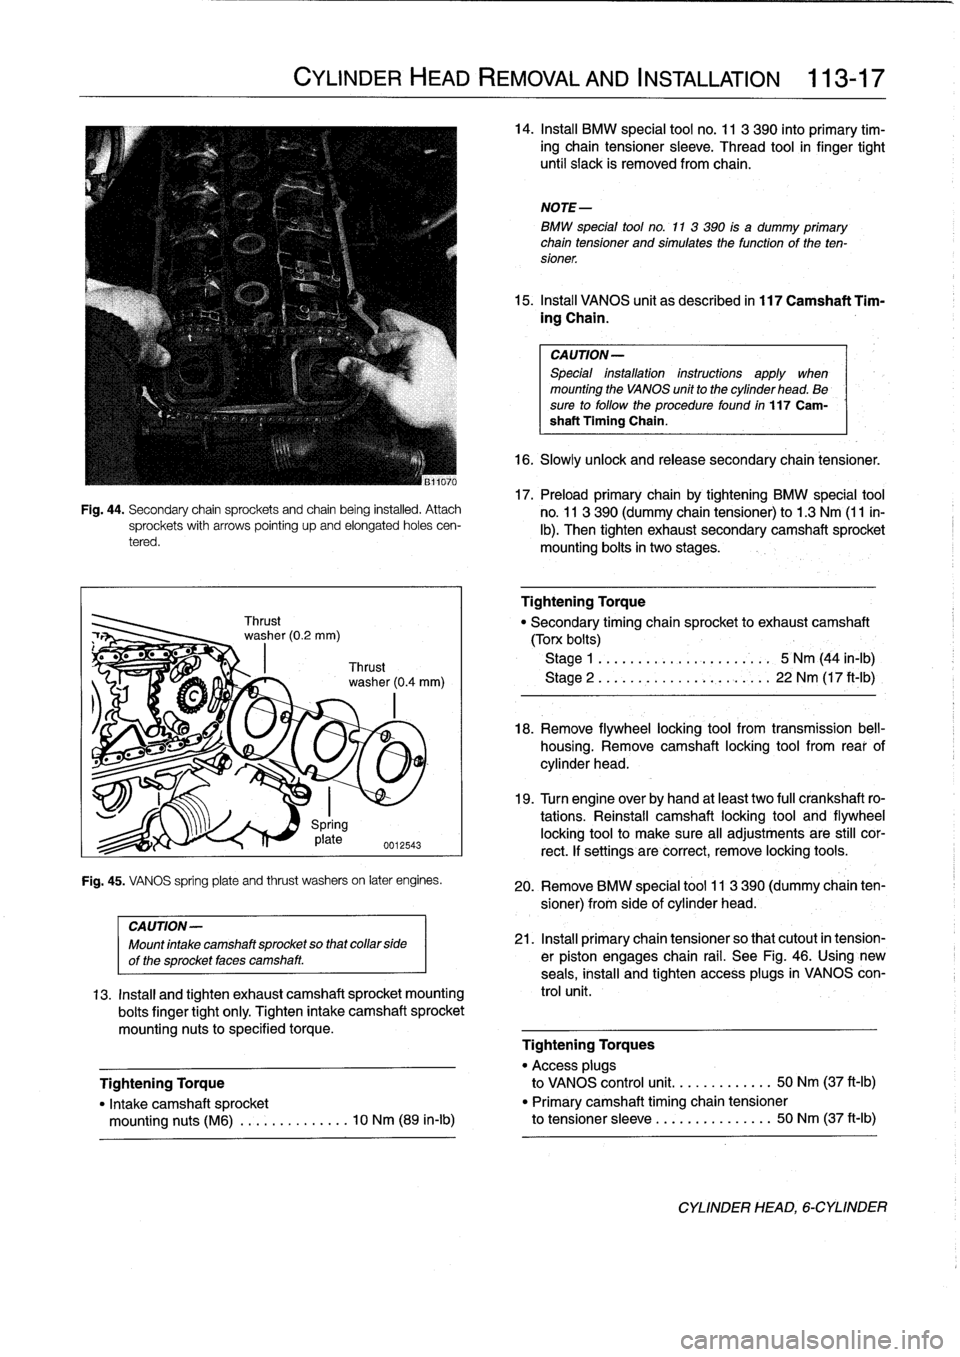 BMW 318i 1997 E36 Workshop Manual 
Fig
.
44
.
Secondary
chain
sprockets
and
chain
being
installed
.
Attachsprockets
with
arrows
pointing
upand
elongated
holes
cen-
tered
.

CYLINDER
HEAD
REMOVAL
AND
INSTALLATION

	

113-17

Spring
17
